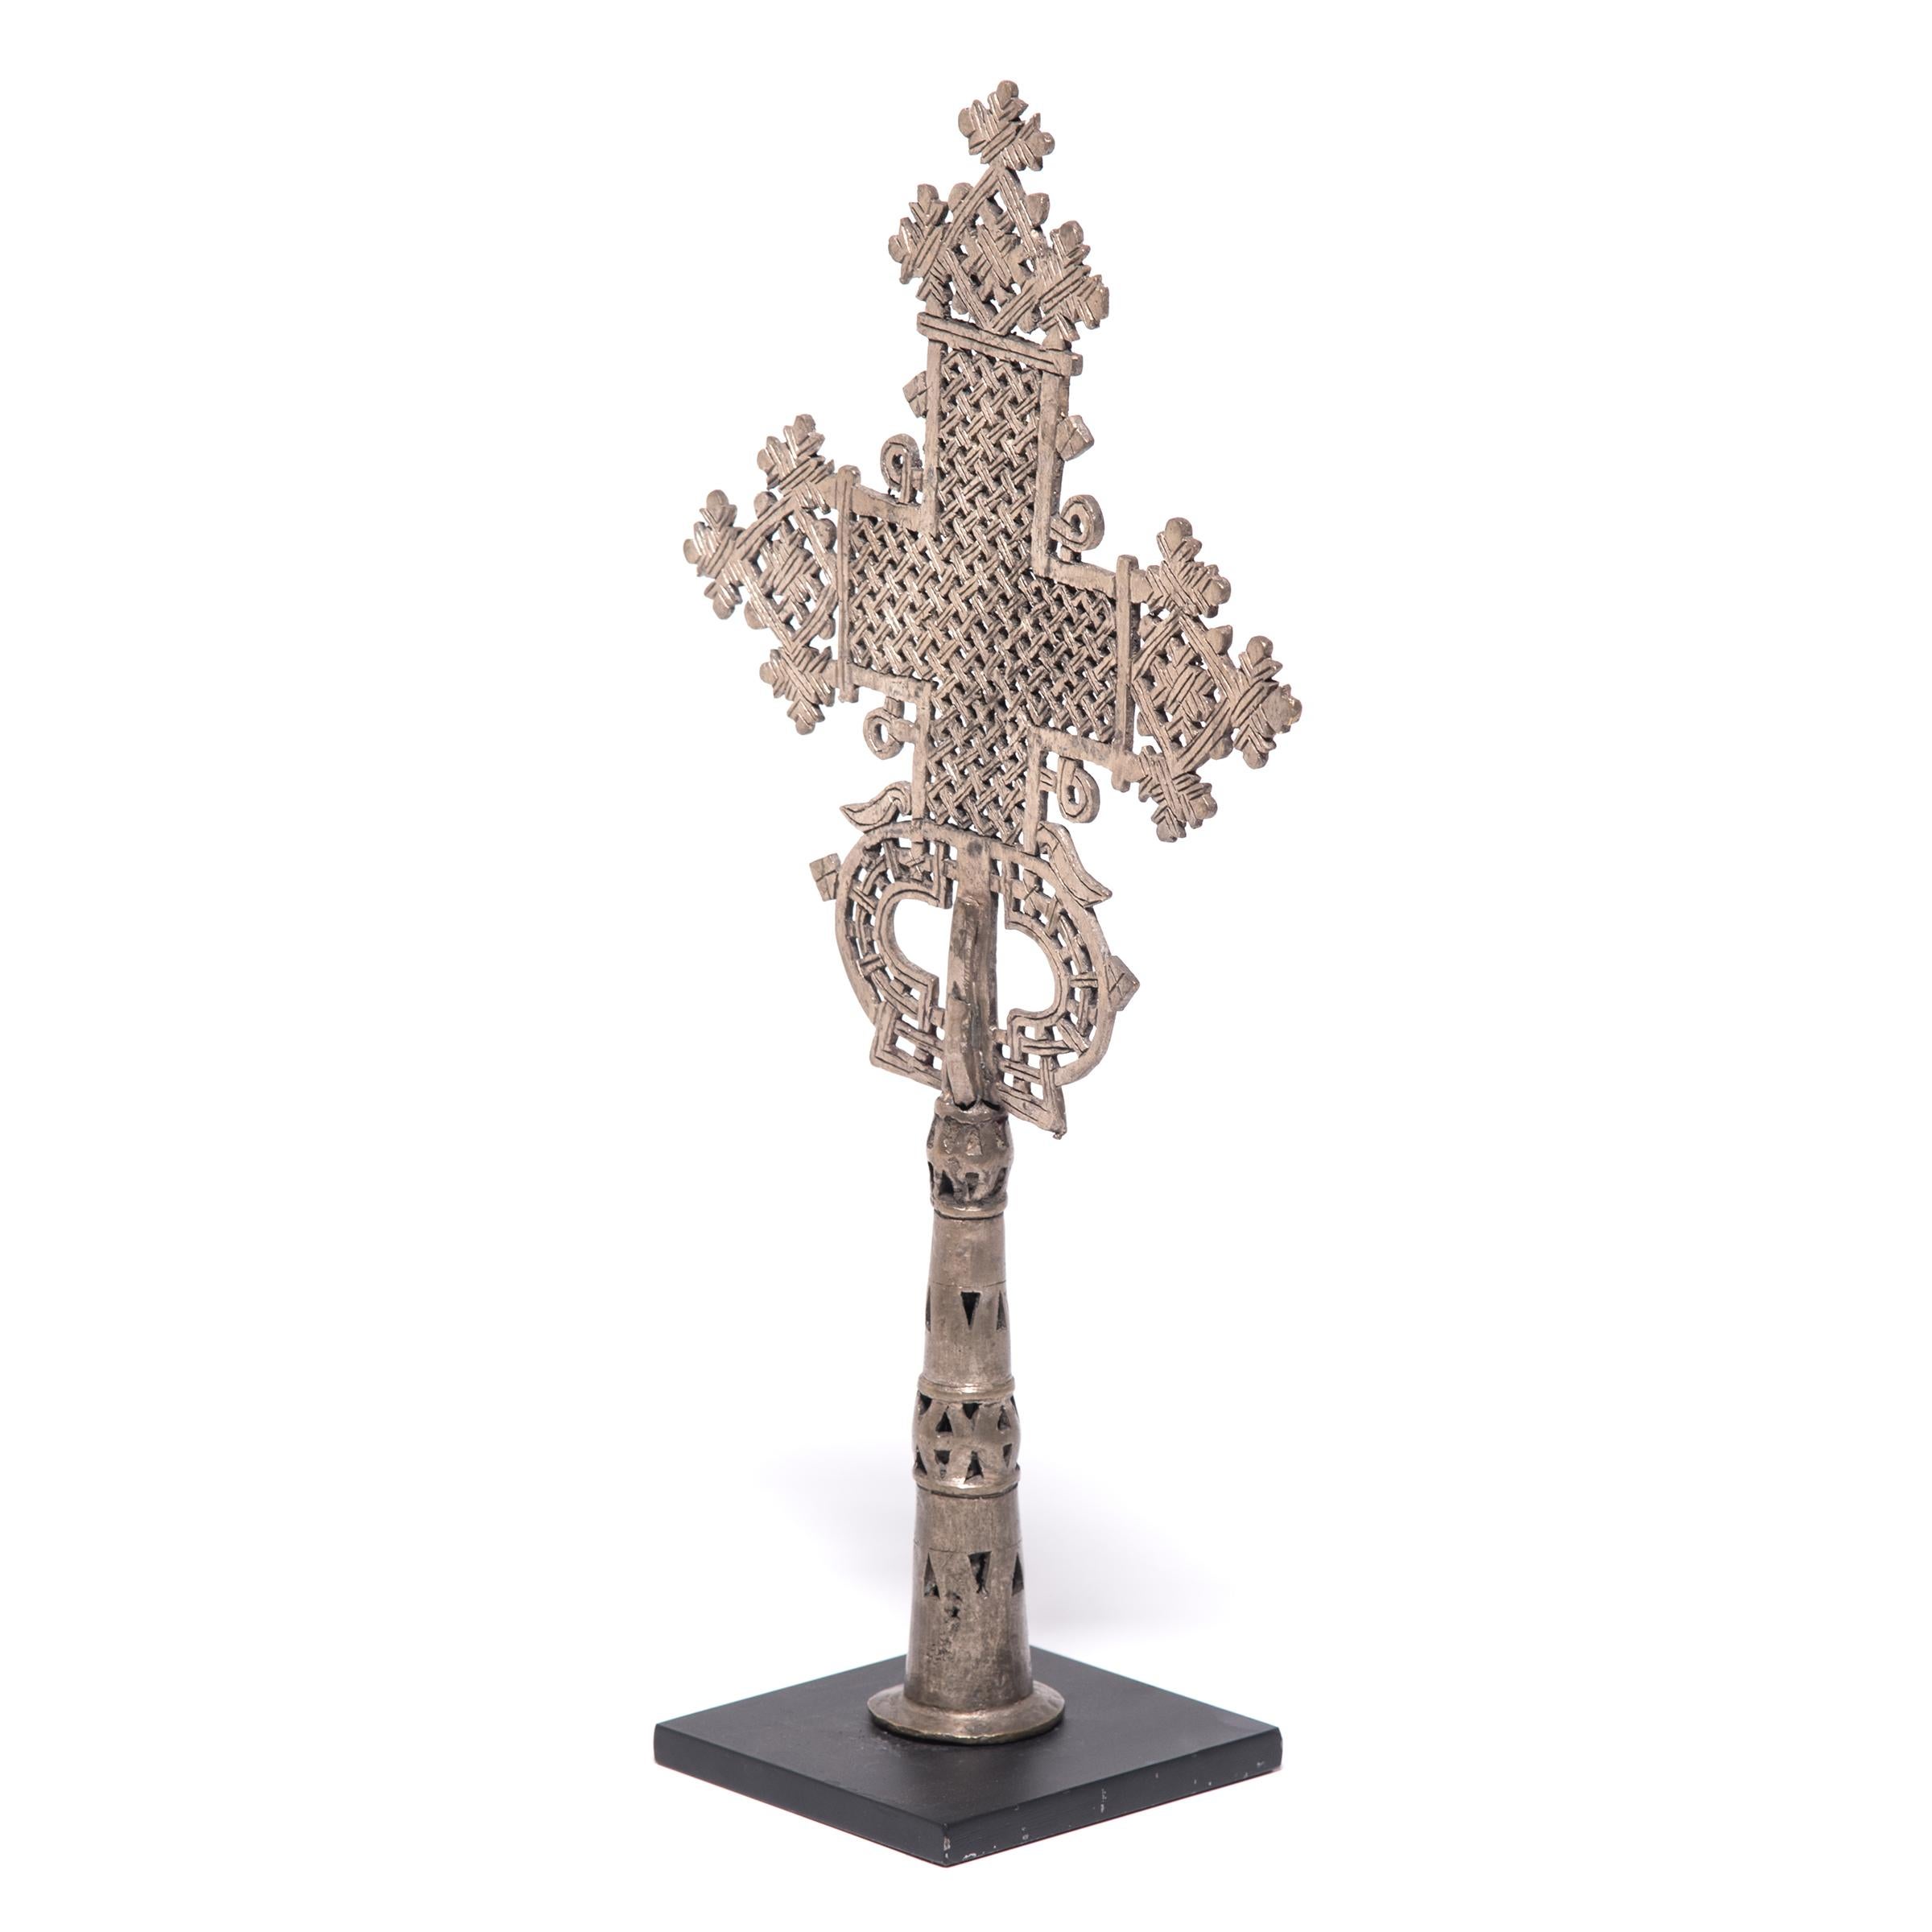 This intricate Ethiopian processional cross exemplifies a style unique to the region's Coptic subset of the Christian faith. The exquisitely detailed perforated form is centered on a hollowed base that could be either fitted upon a staff for